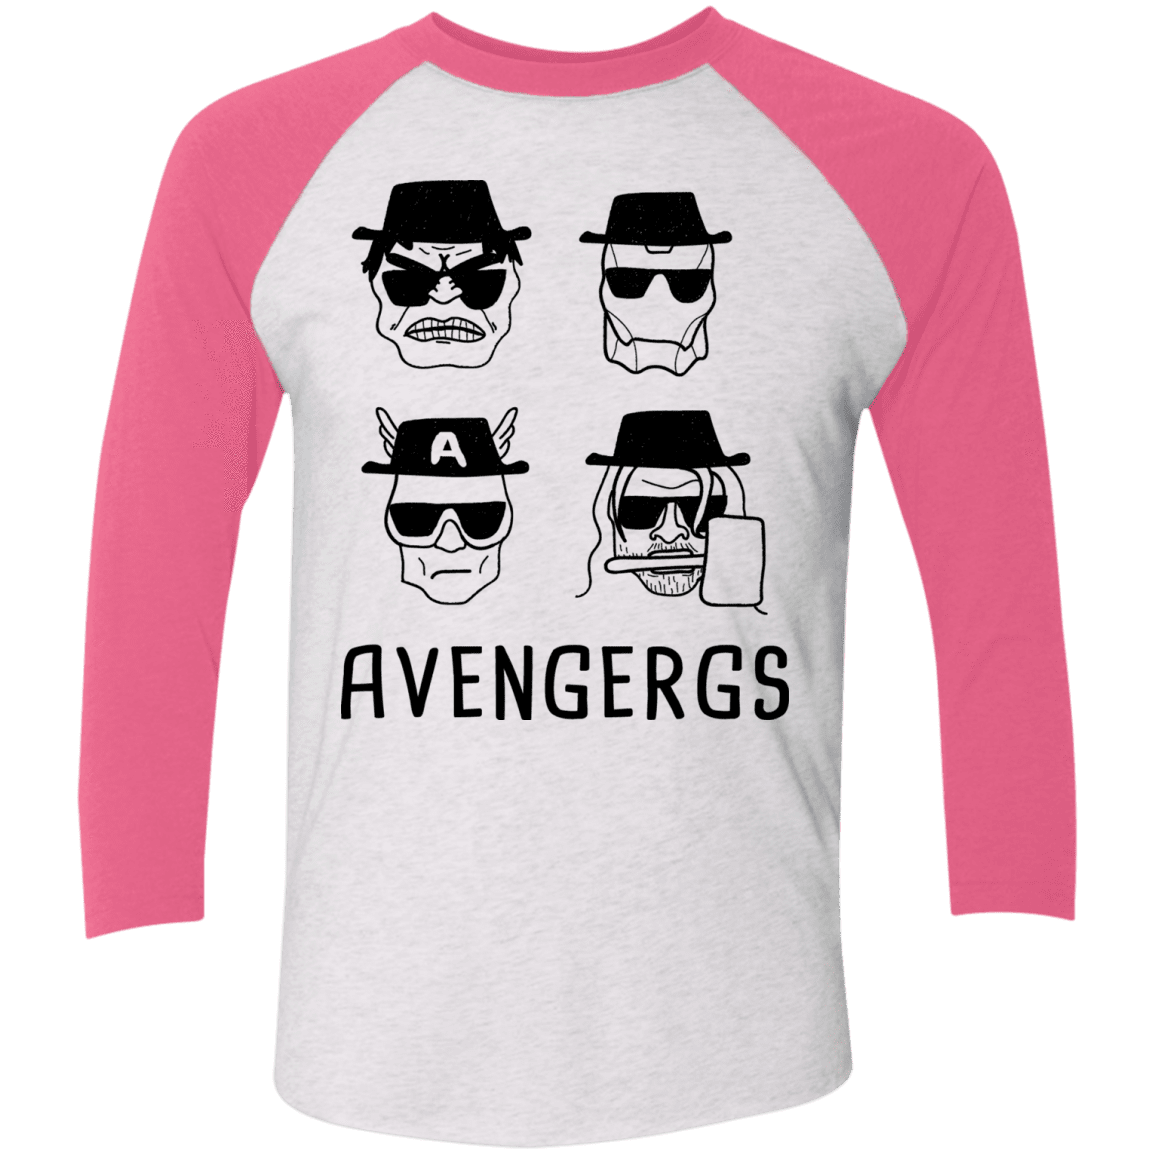 T-Shirts Heather White/Vintage Pink / X-Small Avengergs Men's Triblend 3/4 Sleeve